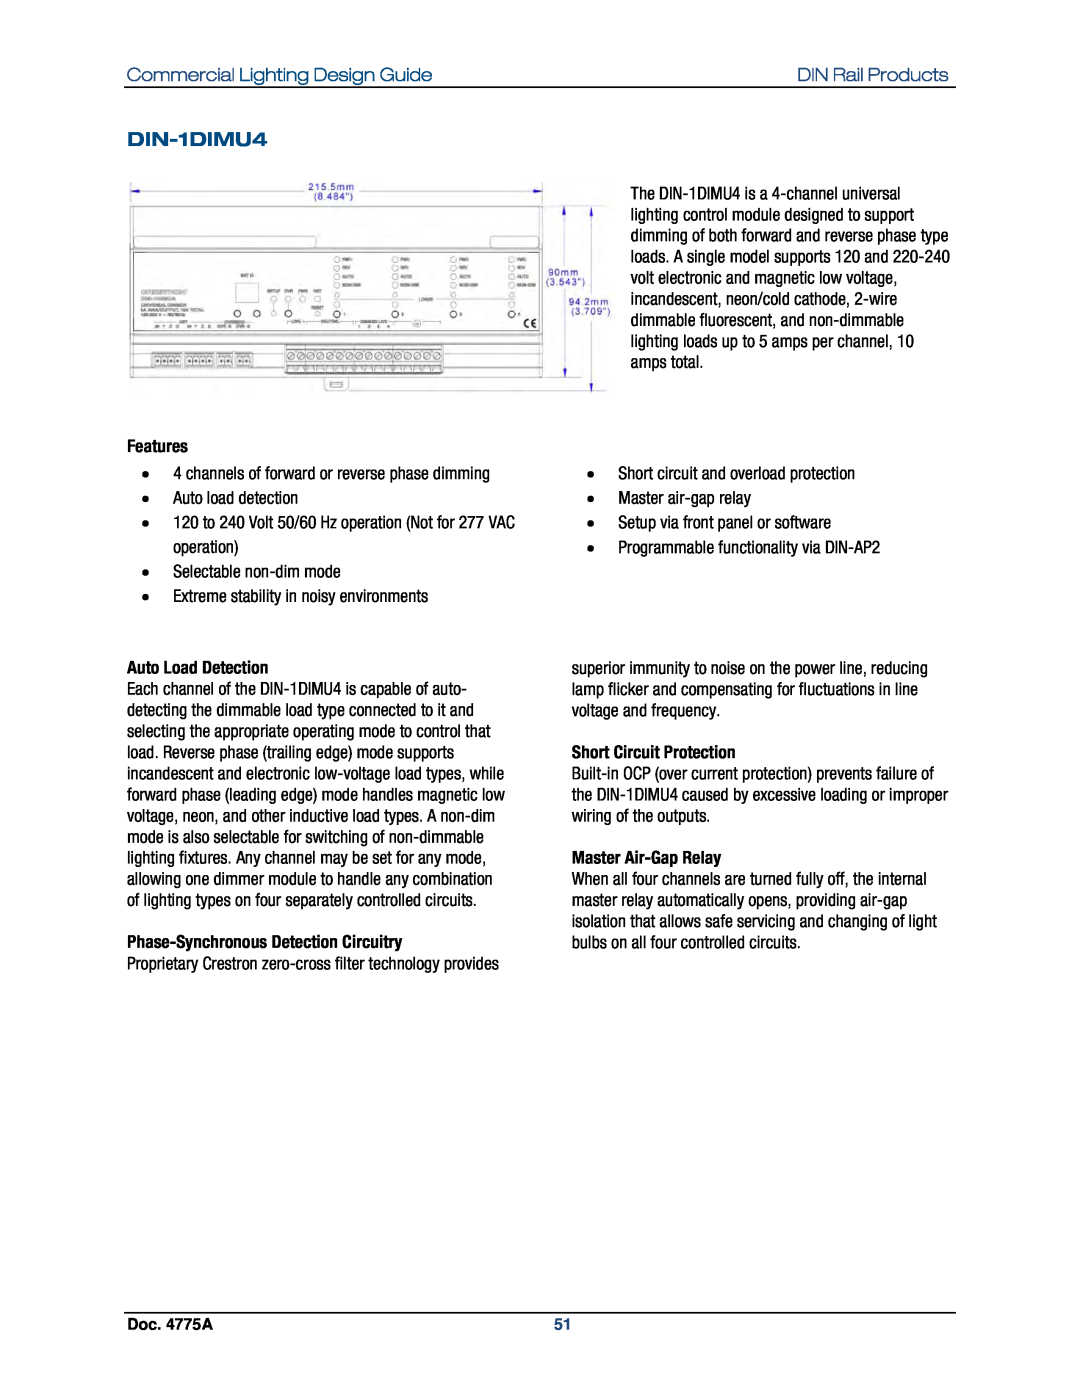 Crestron electronic GLPS-SW DIN-1DIMU4, Commercial Lighting Design Guide, Auto Load Detection, Short Circuit Protection 